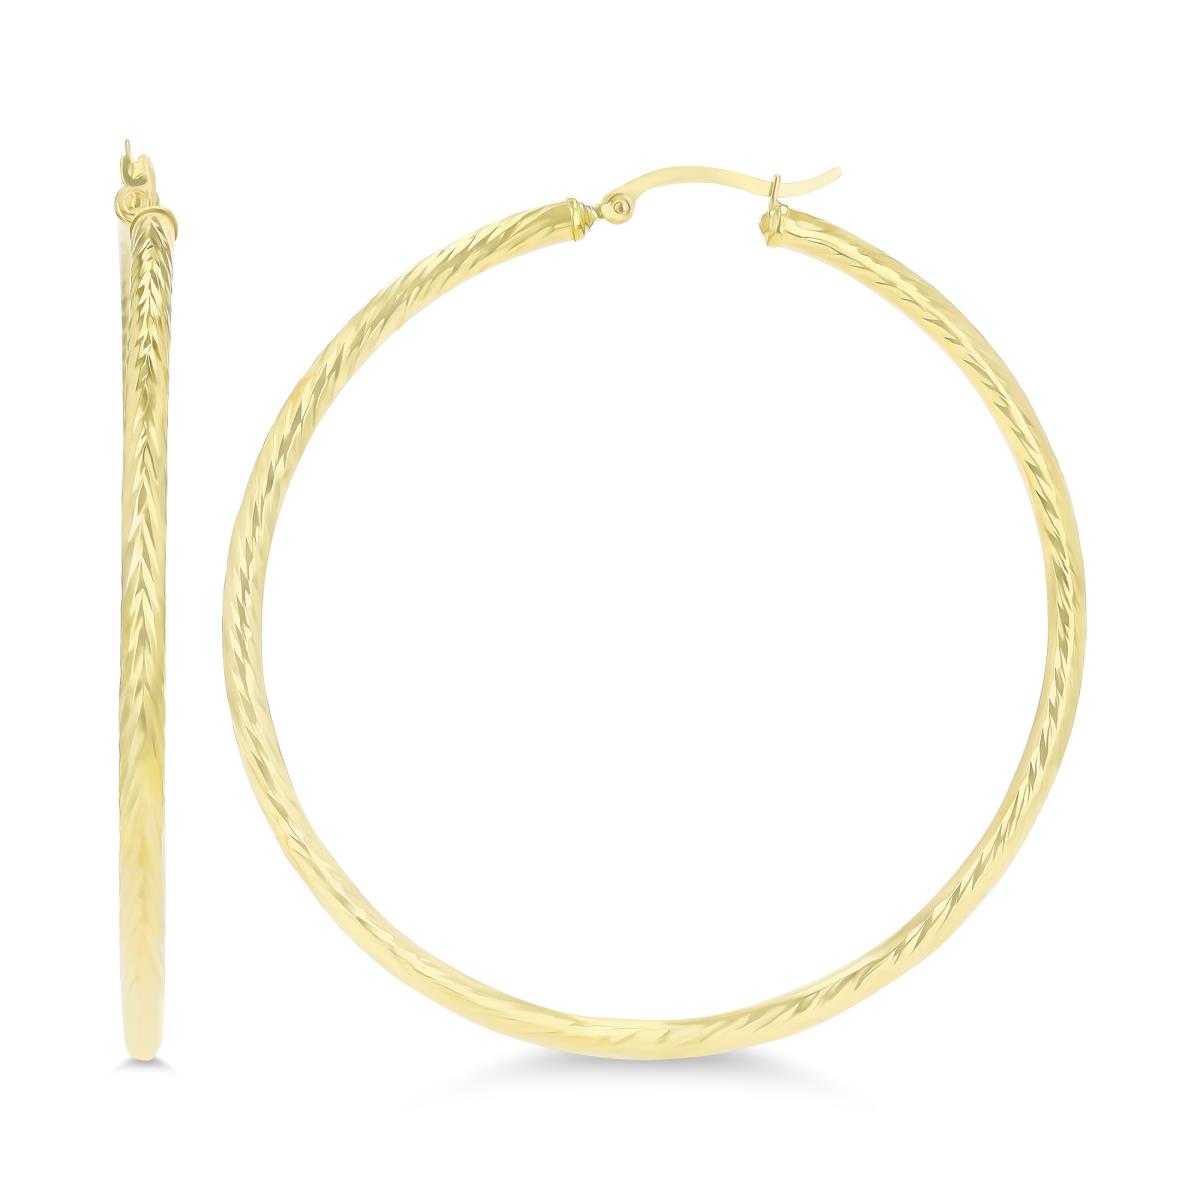 14K Yellow Gold 65x3mm (2.50") Twisted DC Hoop Earring